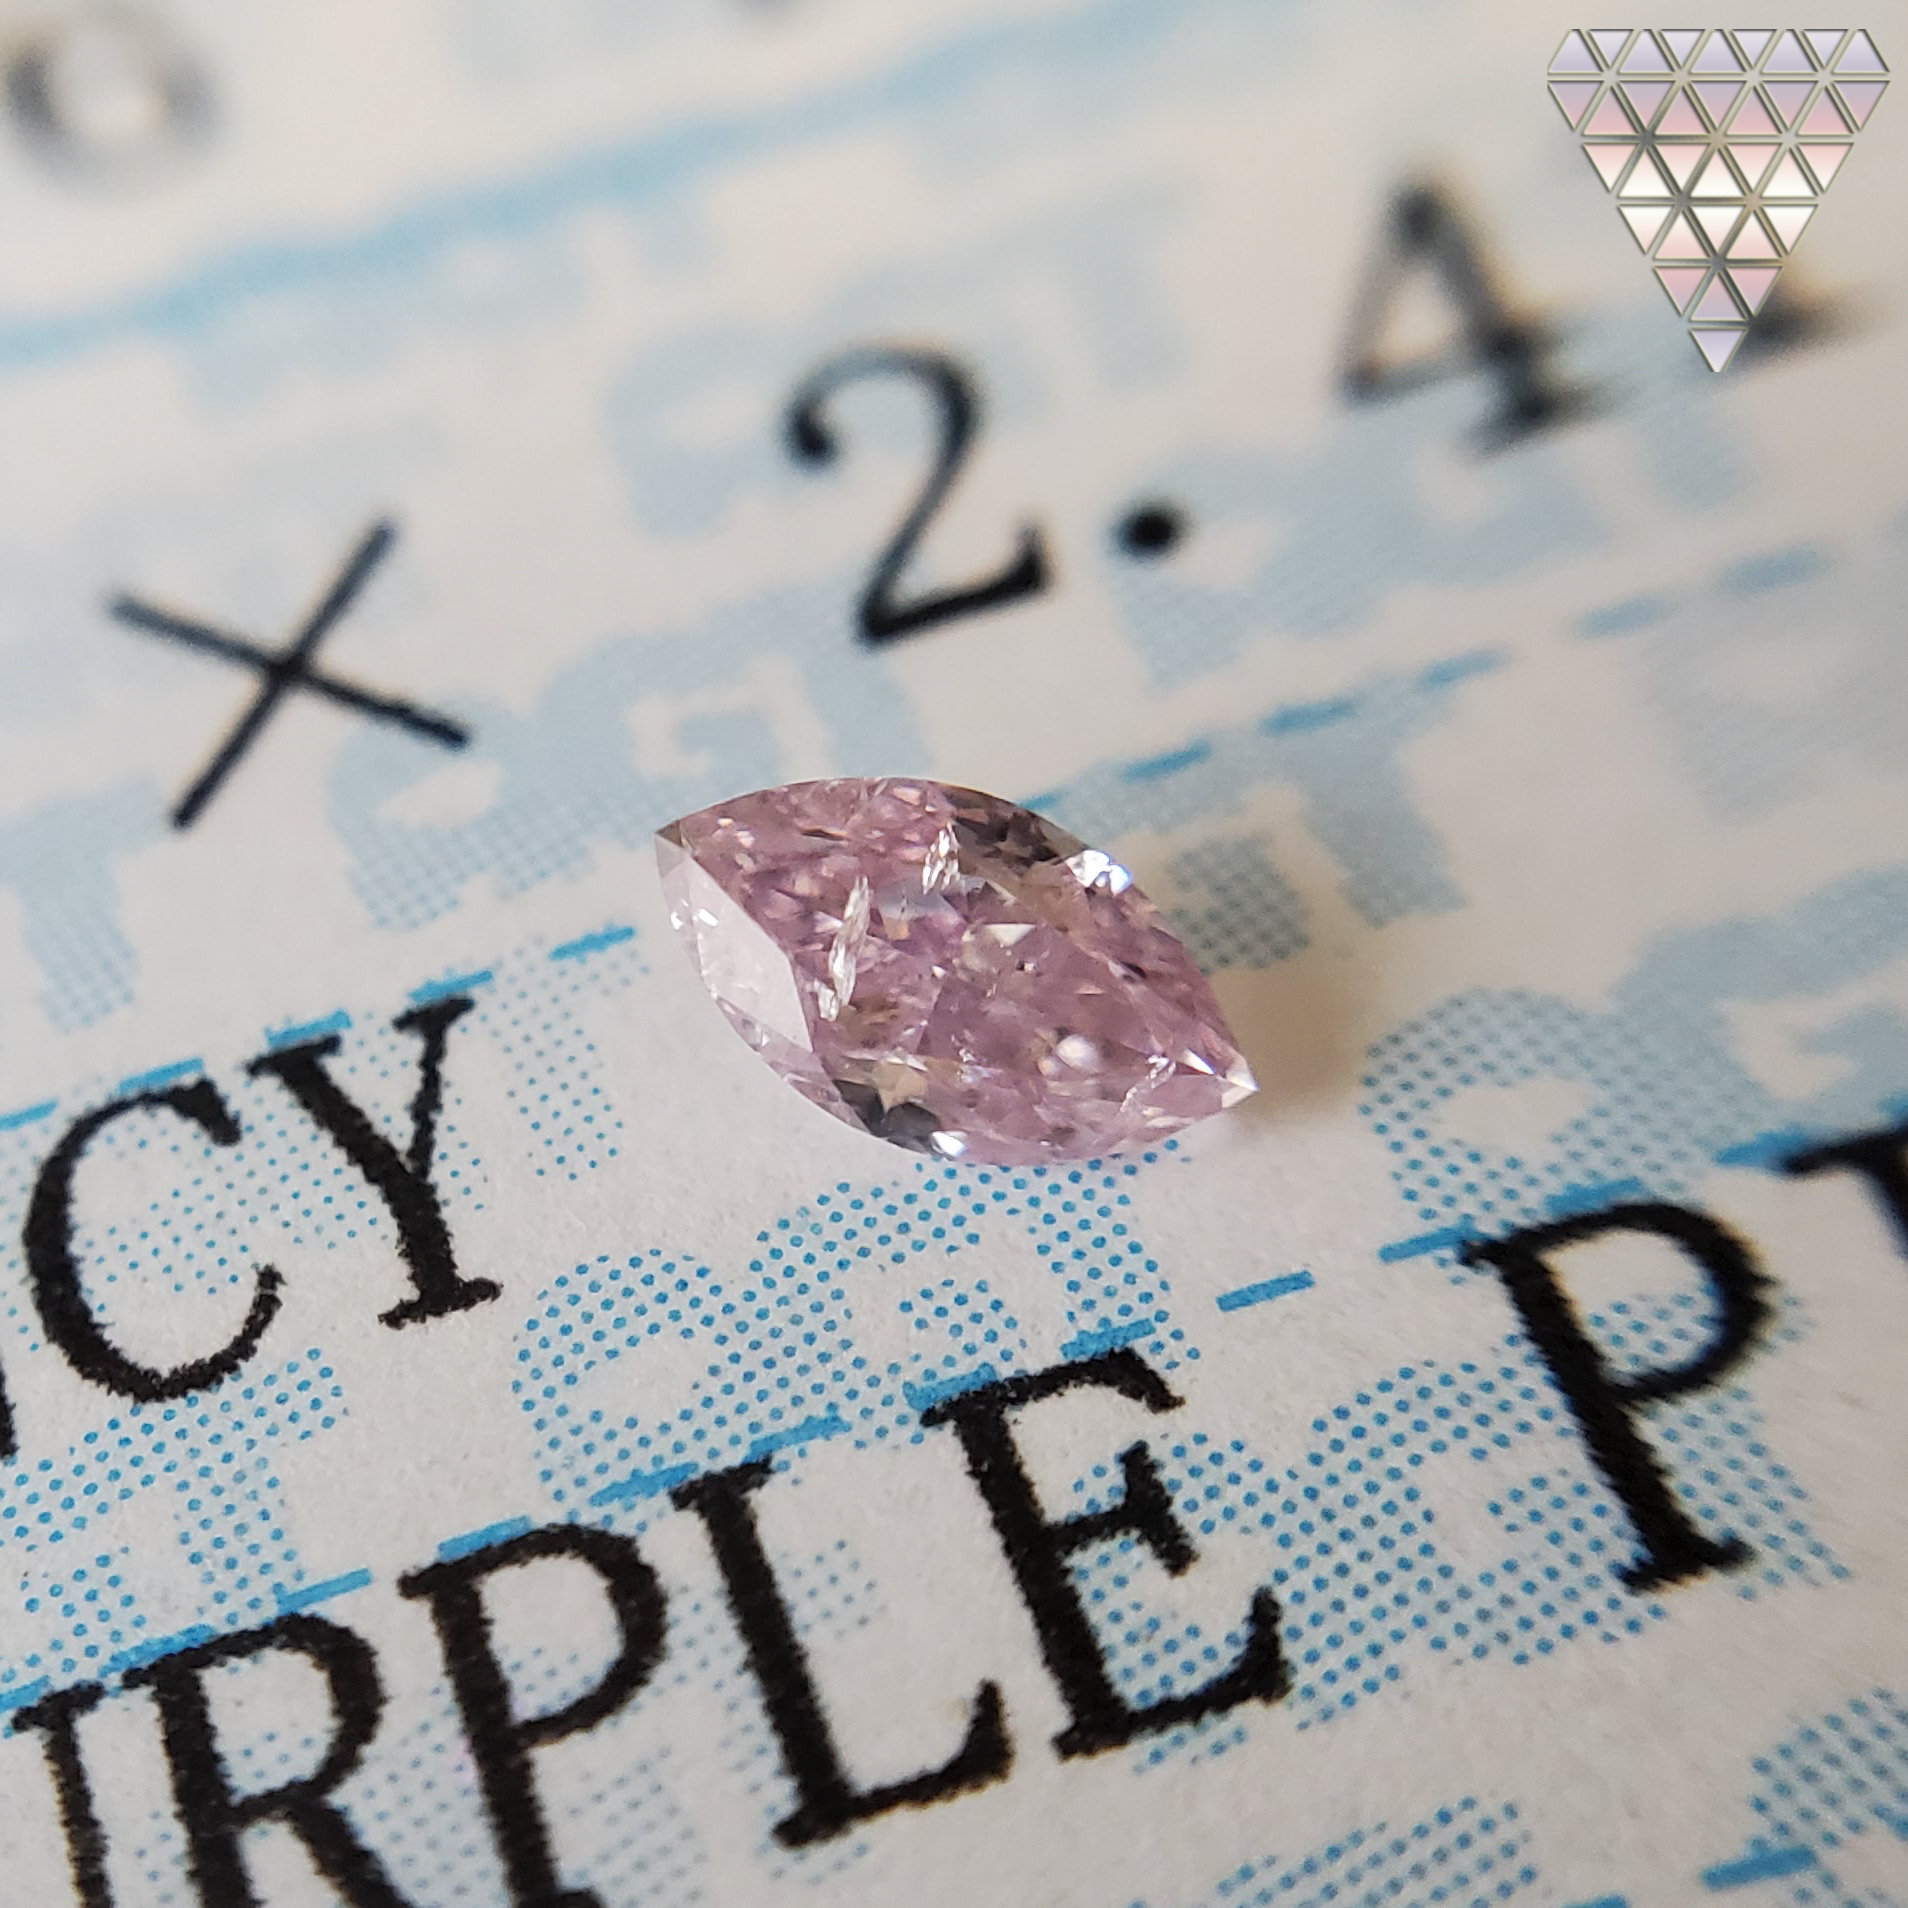 0.114 Ct Fancy Purple Pink I2 Marquise AGT Japan Natural Loose Diamond Exchange Federation 9